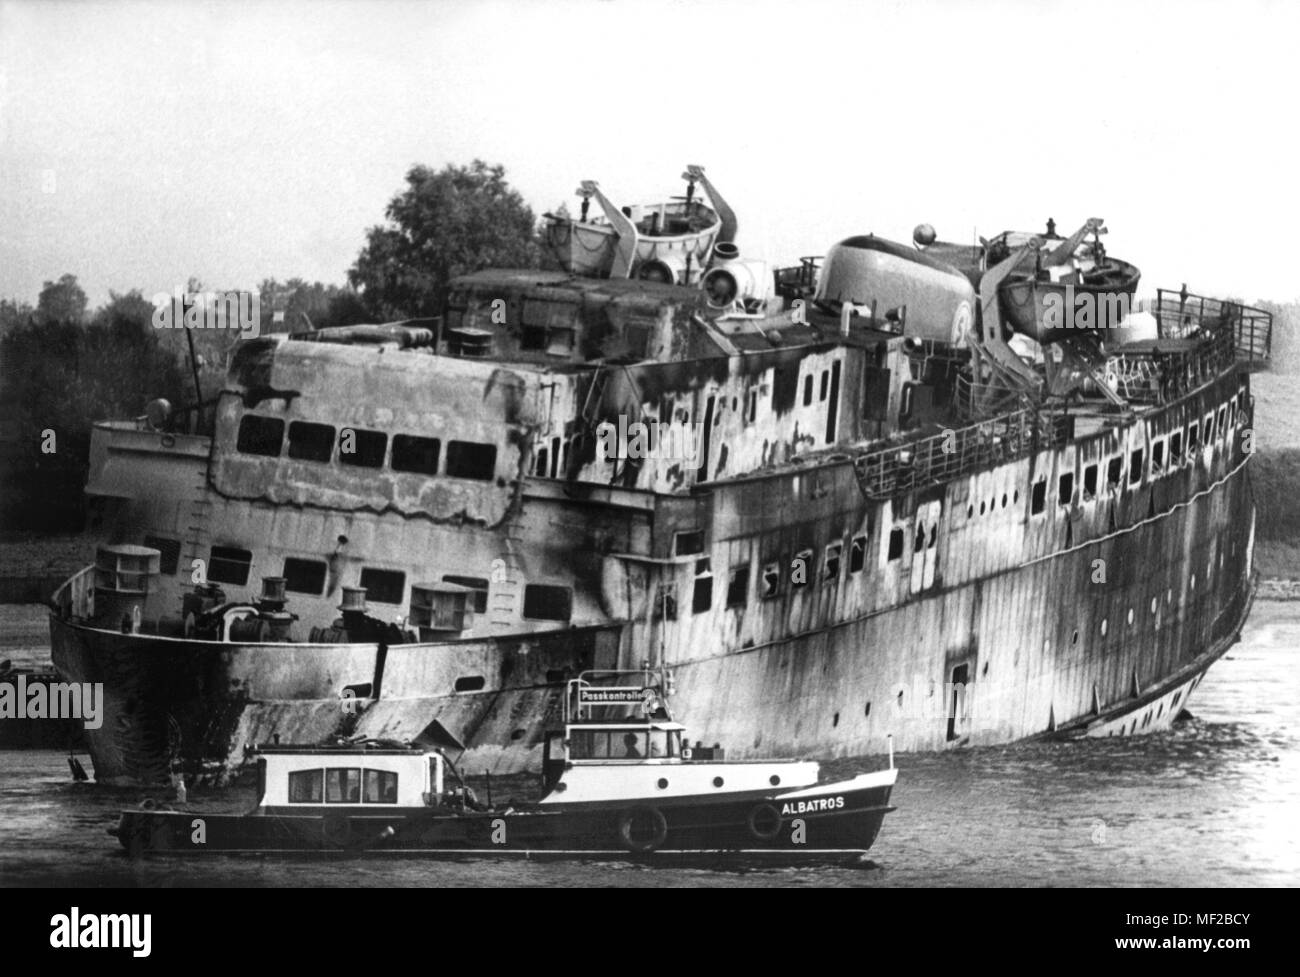 The burned out cargo ship "Tina Scarlett". The 2000-ton Dani driver "Tina Scarlett", built in a Hamburg shipyard, rammed the Belgian tanker "Diamant" on 7 October 1960 on her way from Koln after Rotterdam near the border town of Emmerich. The tanker immediately leaked and the gas leaked caught fire. The Dutch motor ship "Farewell 2" sailed a little later into the nested ships. The rapidly spreading flames attacked eight other larger and smaller motor ships. The accident killed two people, eight suffered severe burn injuries. | usage worldwide Stock Photo